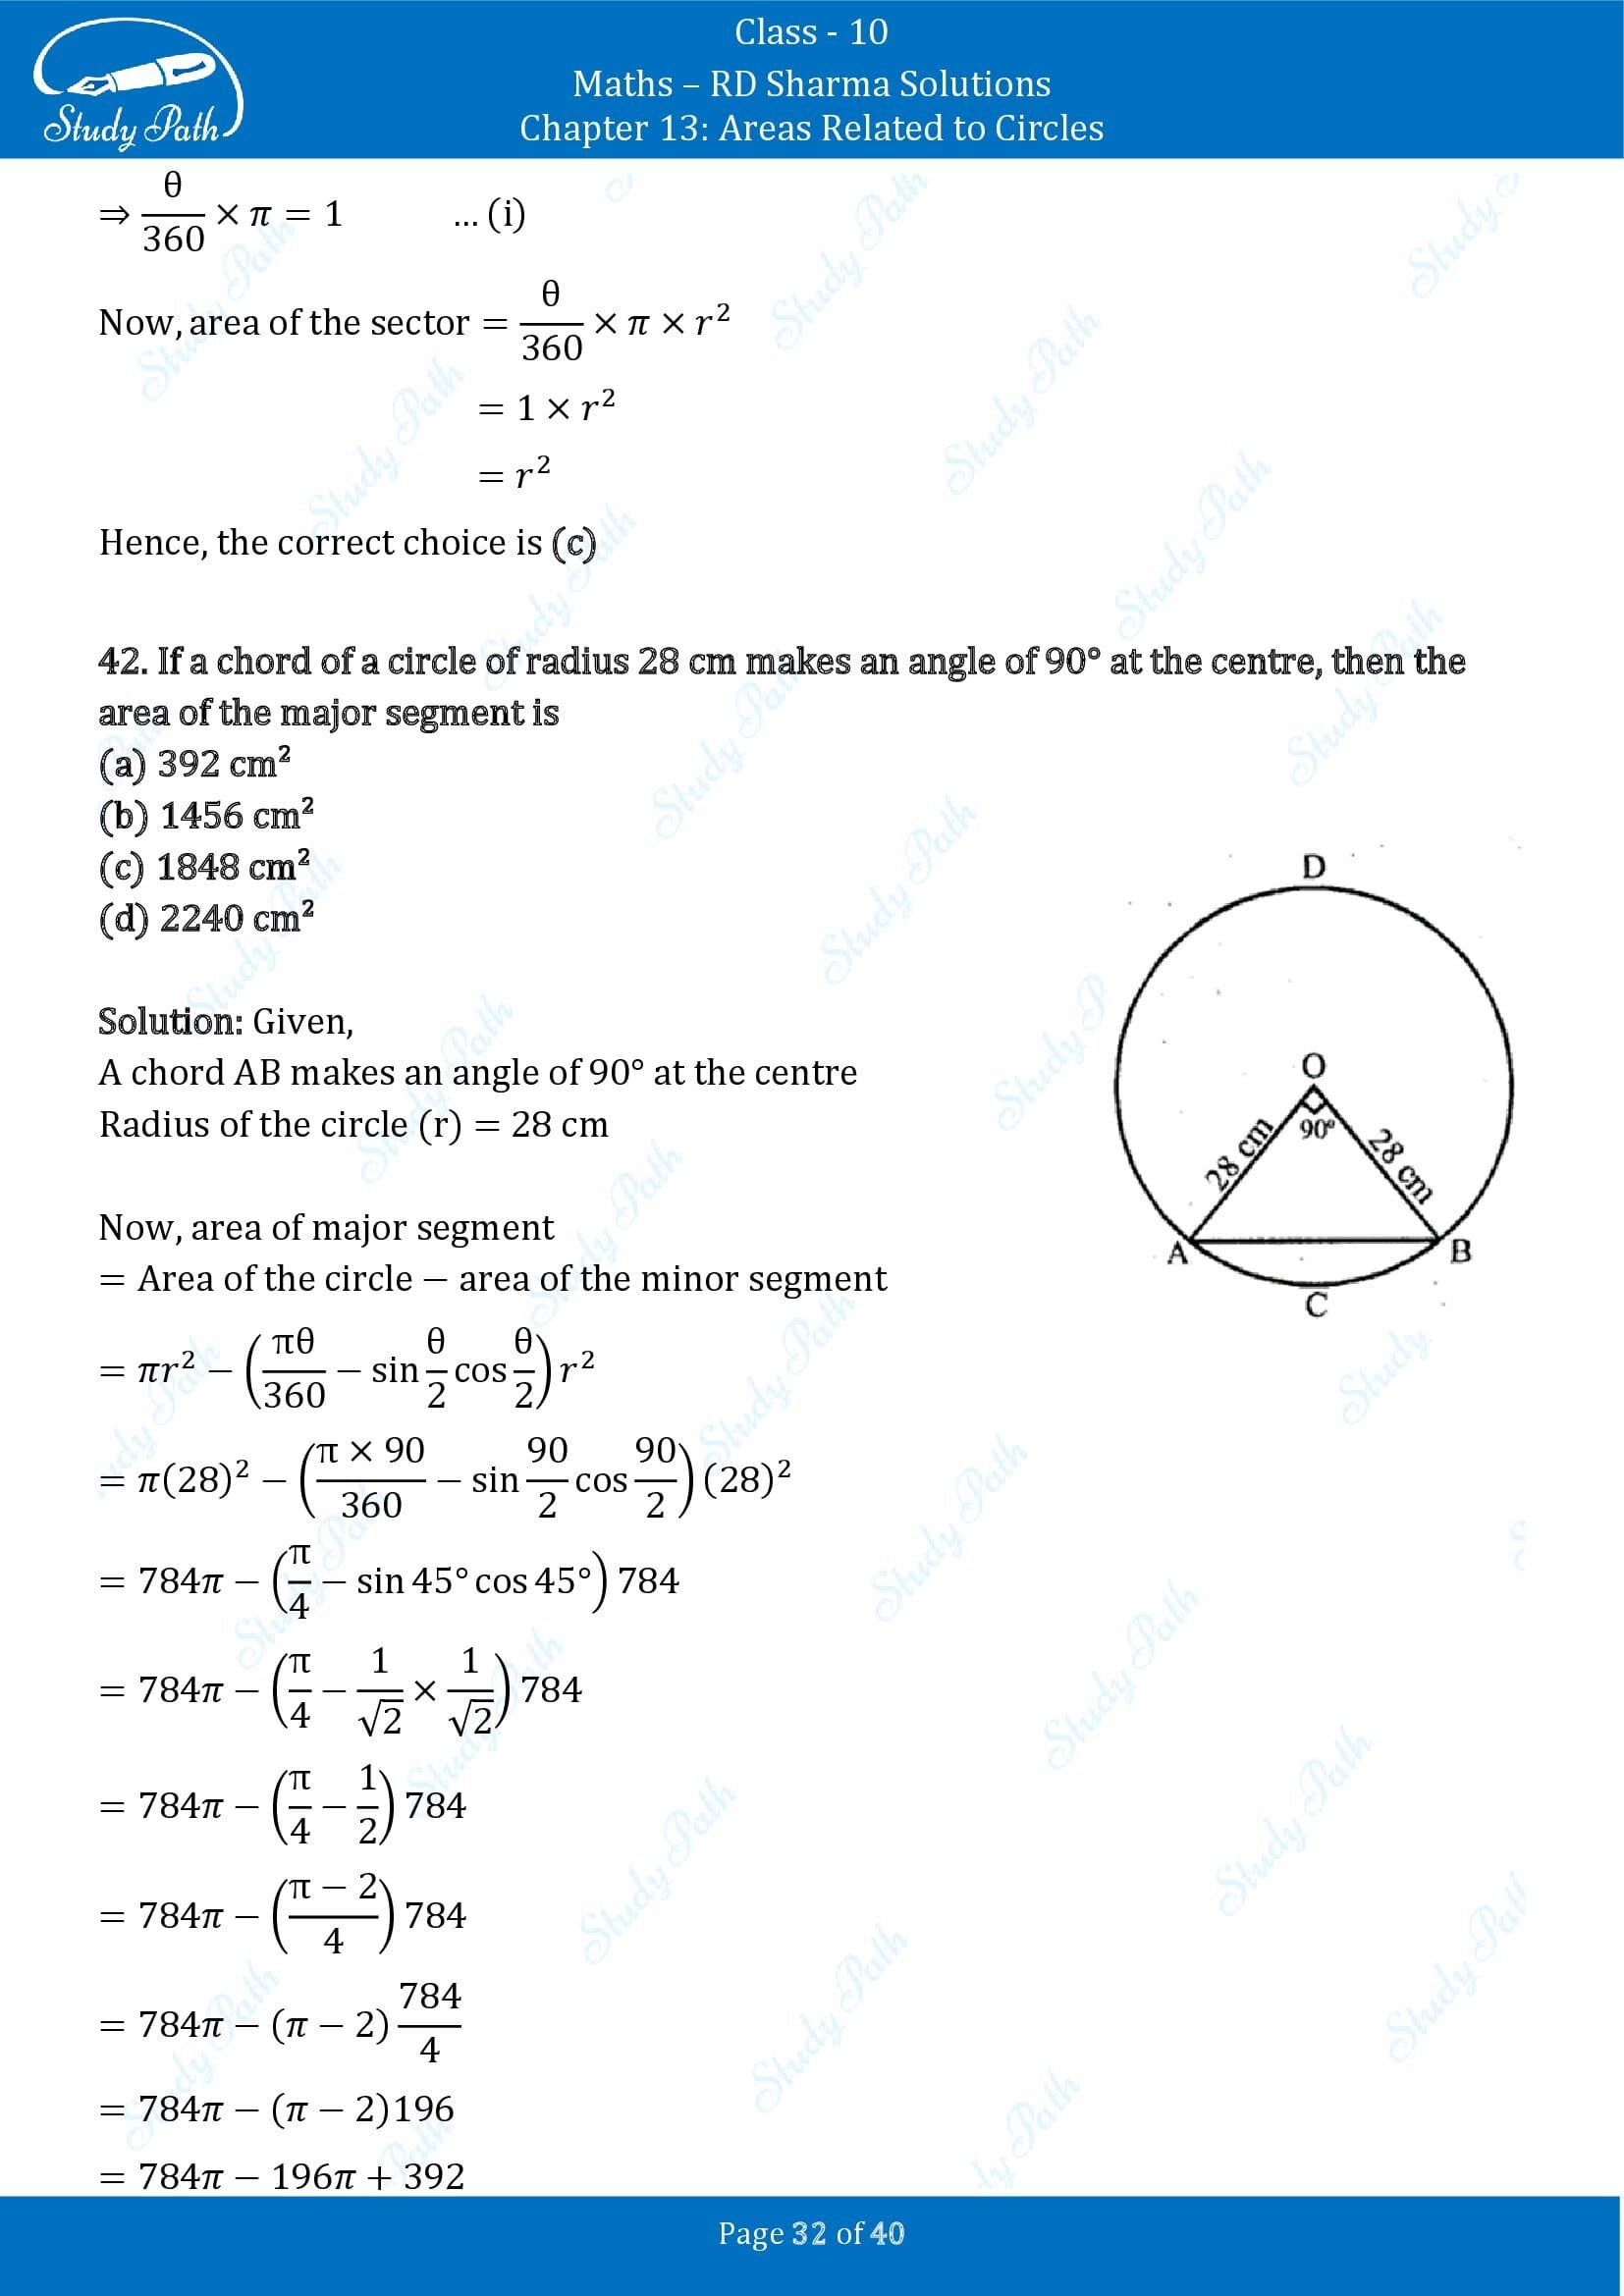 RD Sharma Solutions Class 10 Chapter 13 Areas Related to Circles Multiple Choice Question MCQs 00032